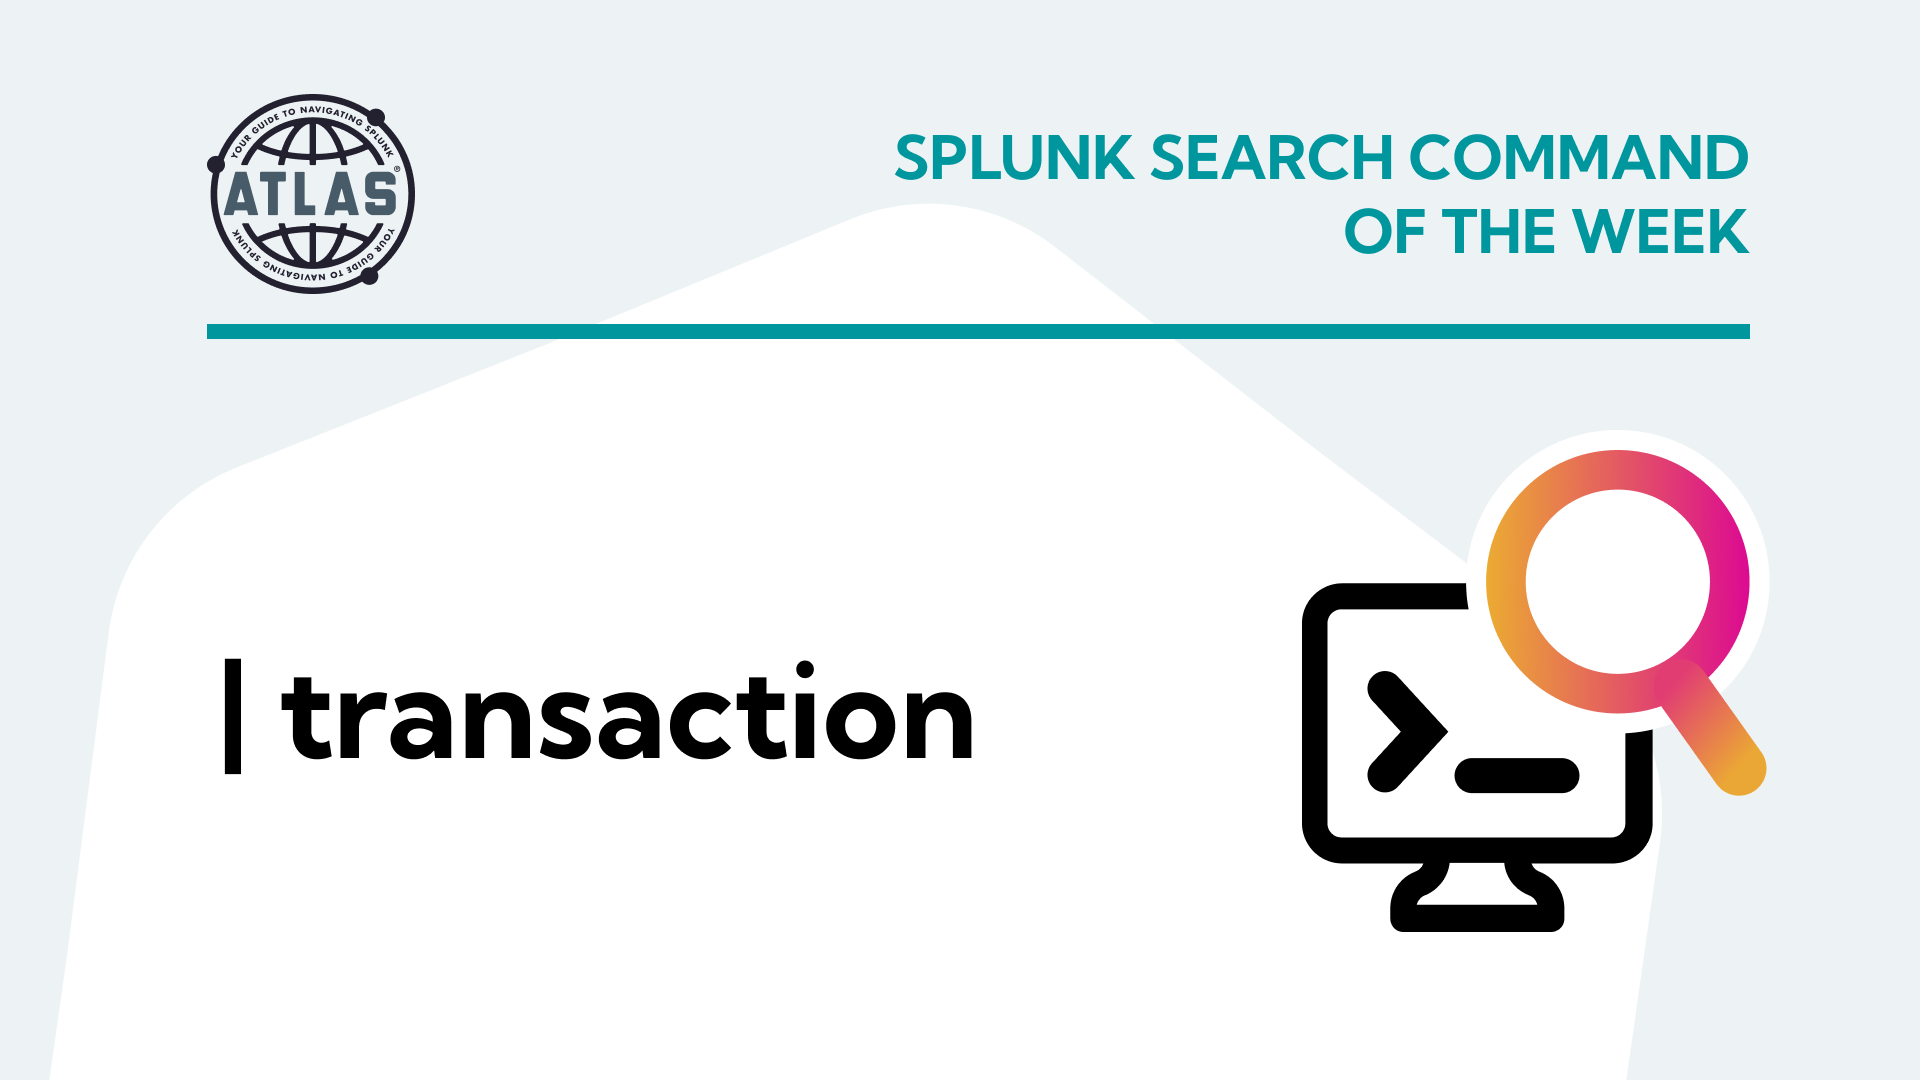 Using the transaction Command